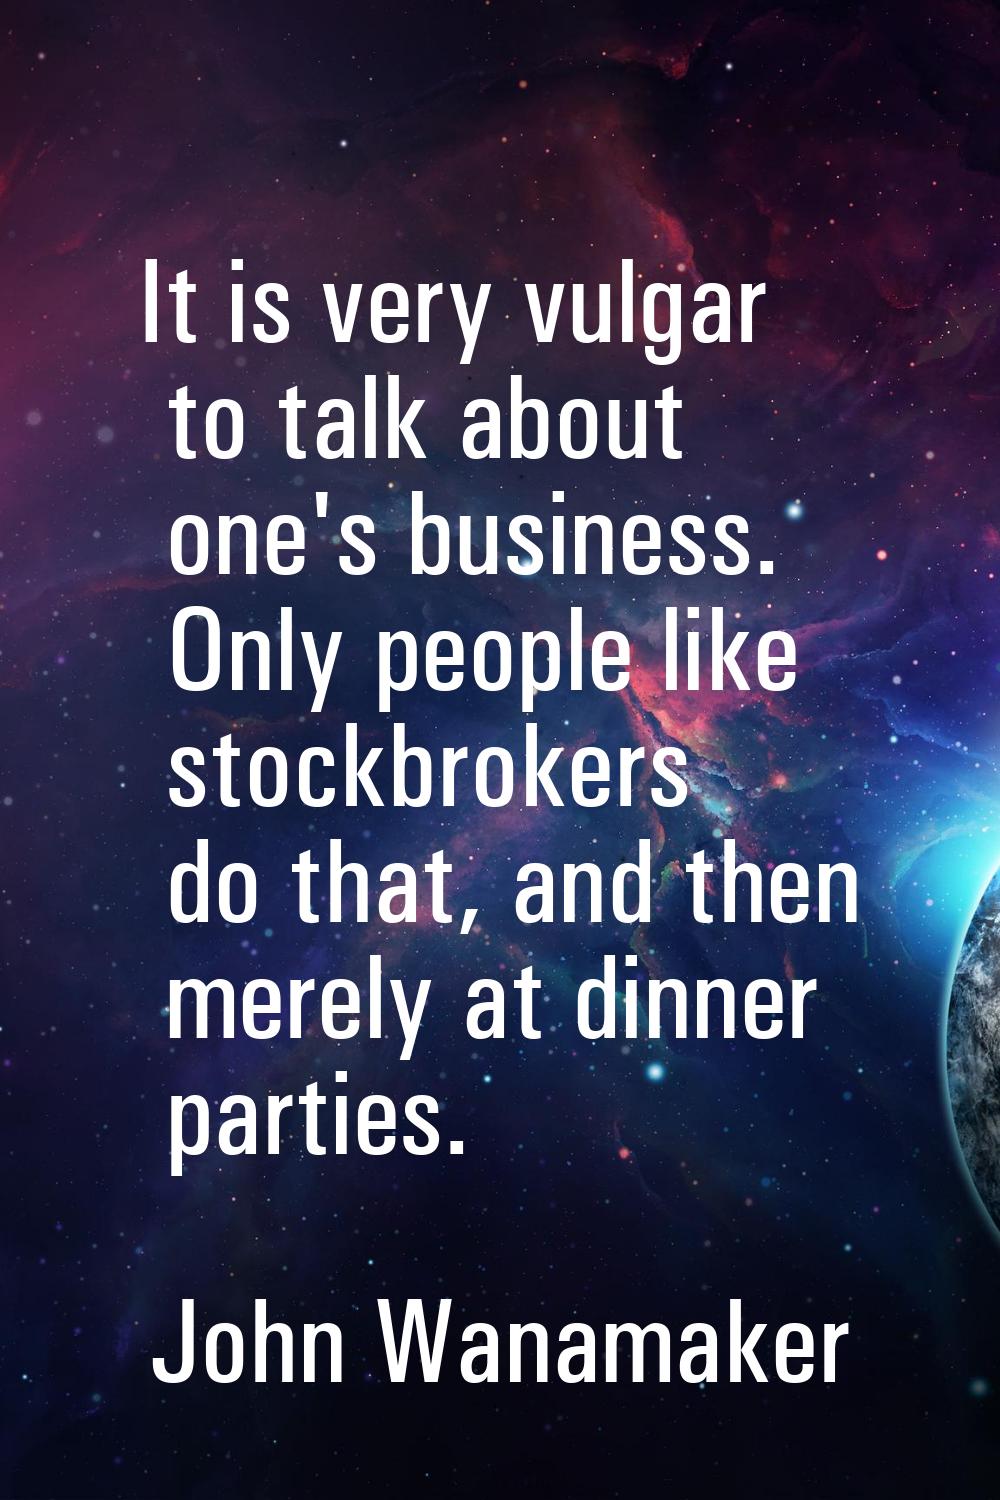 It is very vulgar to talk about one's business. Only people like stockbrokers do that, and then mer